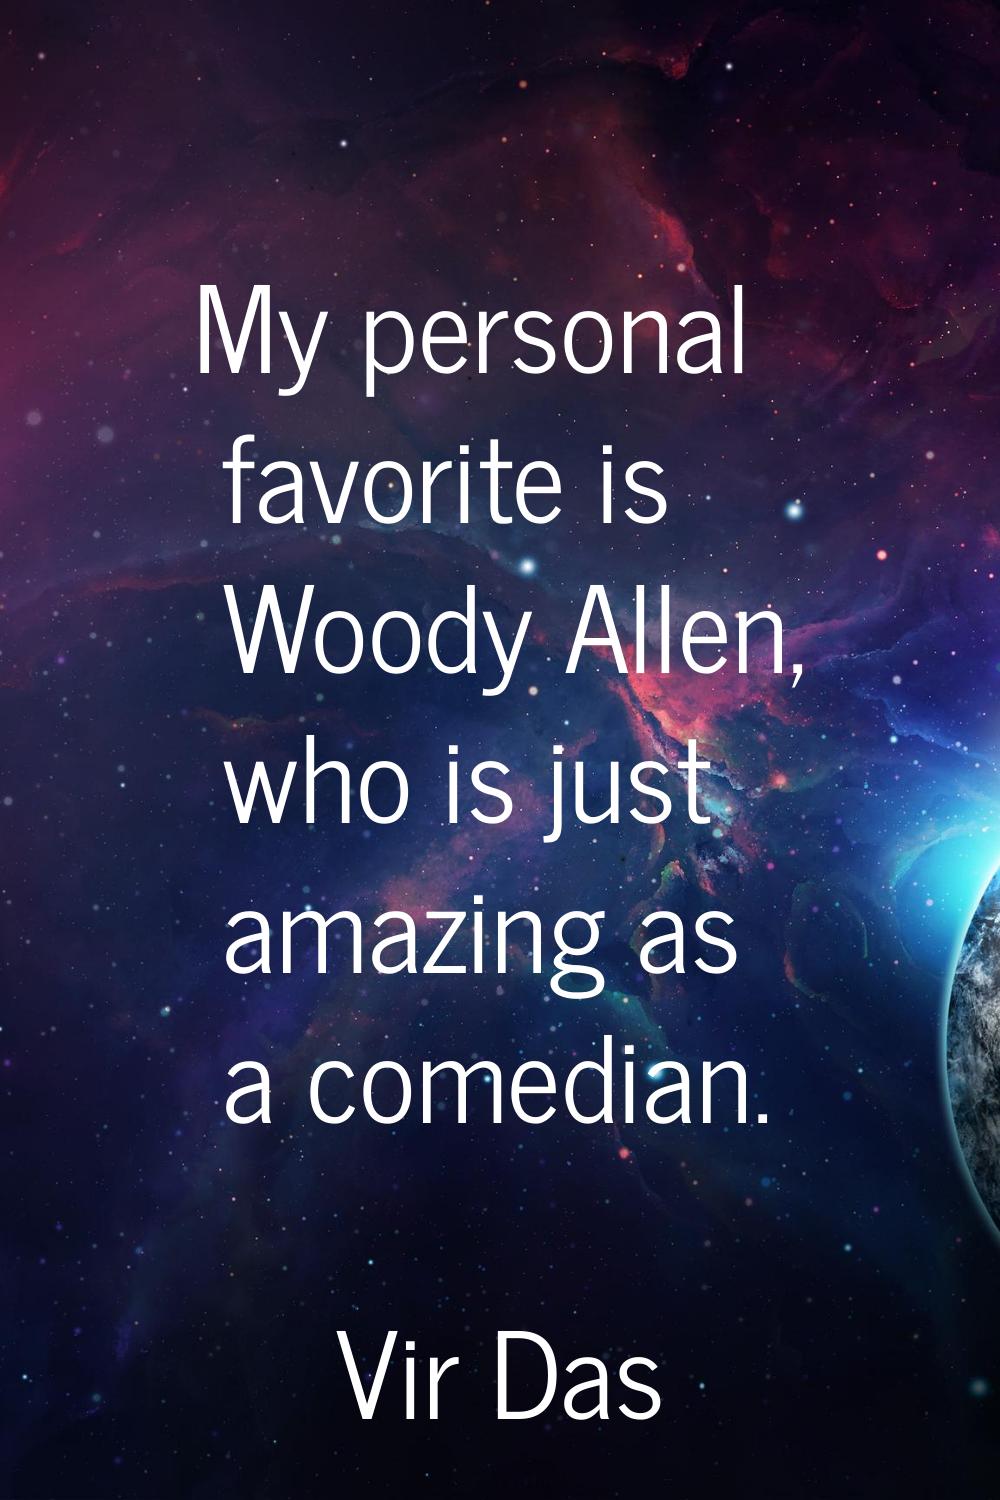 My personal favorite is Woody Allen, who is just amazing as a comedian.